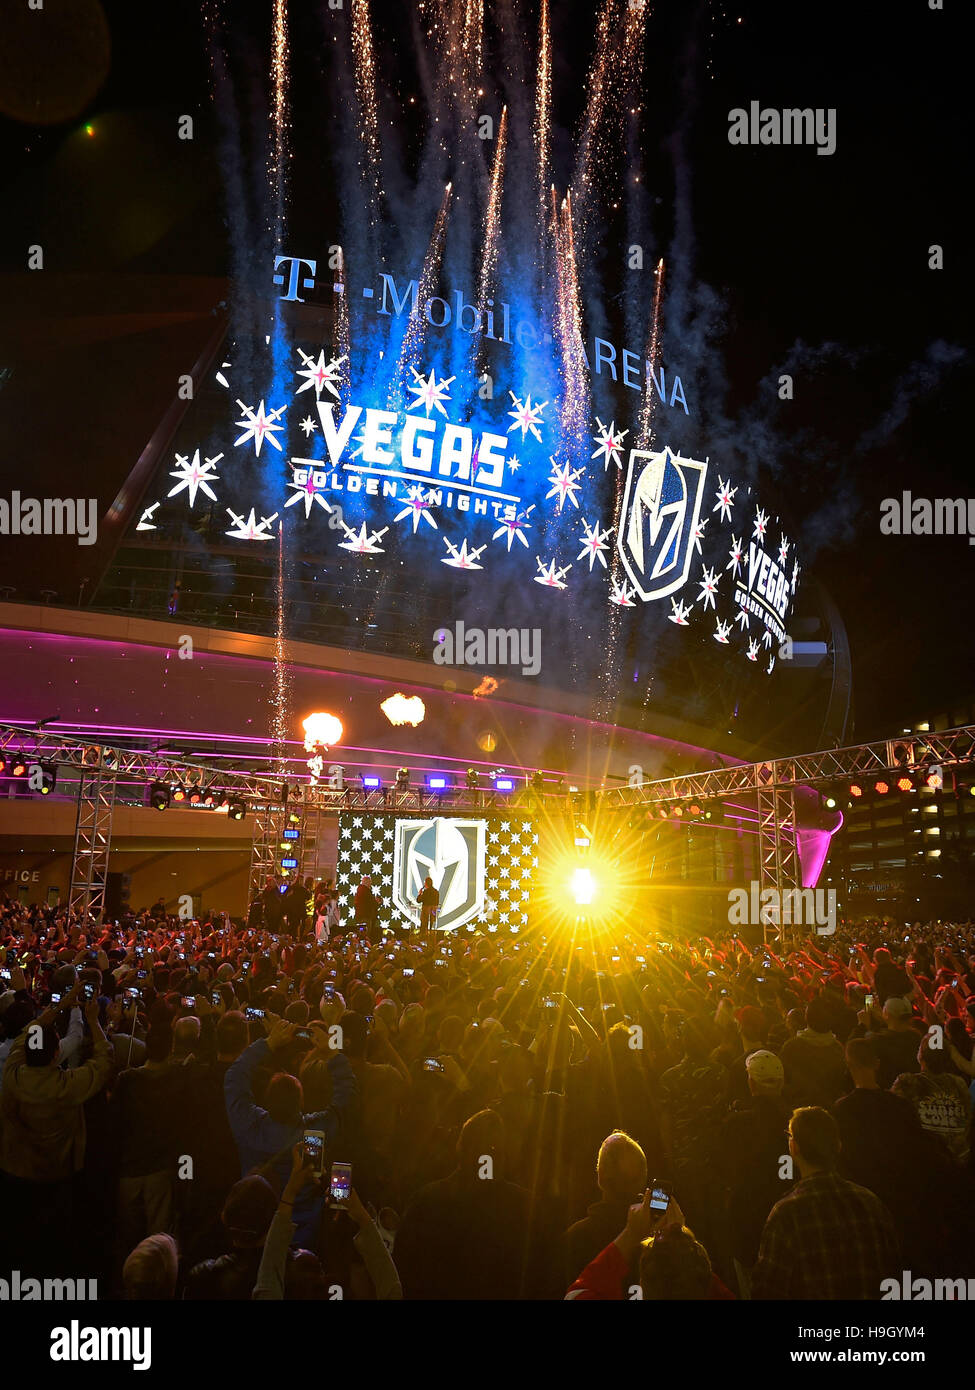 Las Vegas, Nevada, USA. 22nd Nov, 2016. Pyrotechnics and streamers are fired into the air as the Vegas Golden Knights is announced as the name for the Las Vegas NHL franchise at T-Mobile Arena on November 22, 2016 in Las Vegas, Nevada. The team will begin play in the 2017-18 season. © David Becker/ZUMA Wire/Alamy Live News Stock Photo